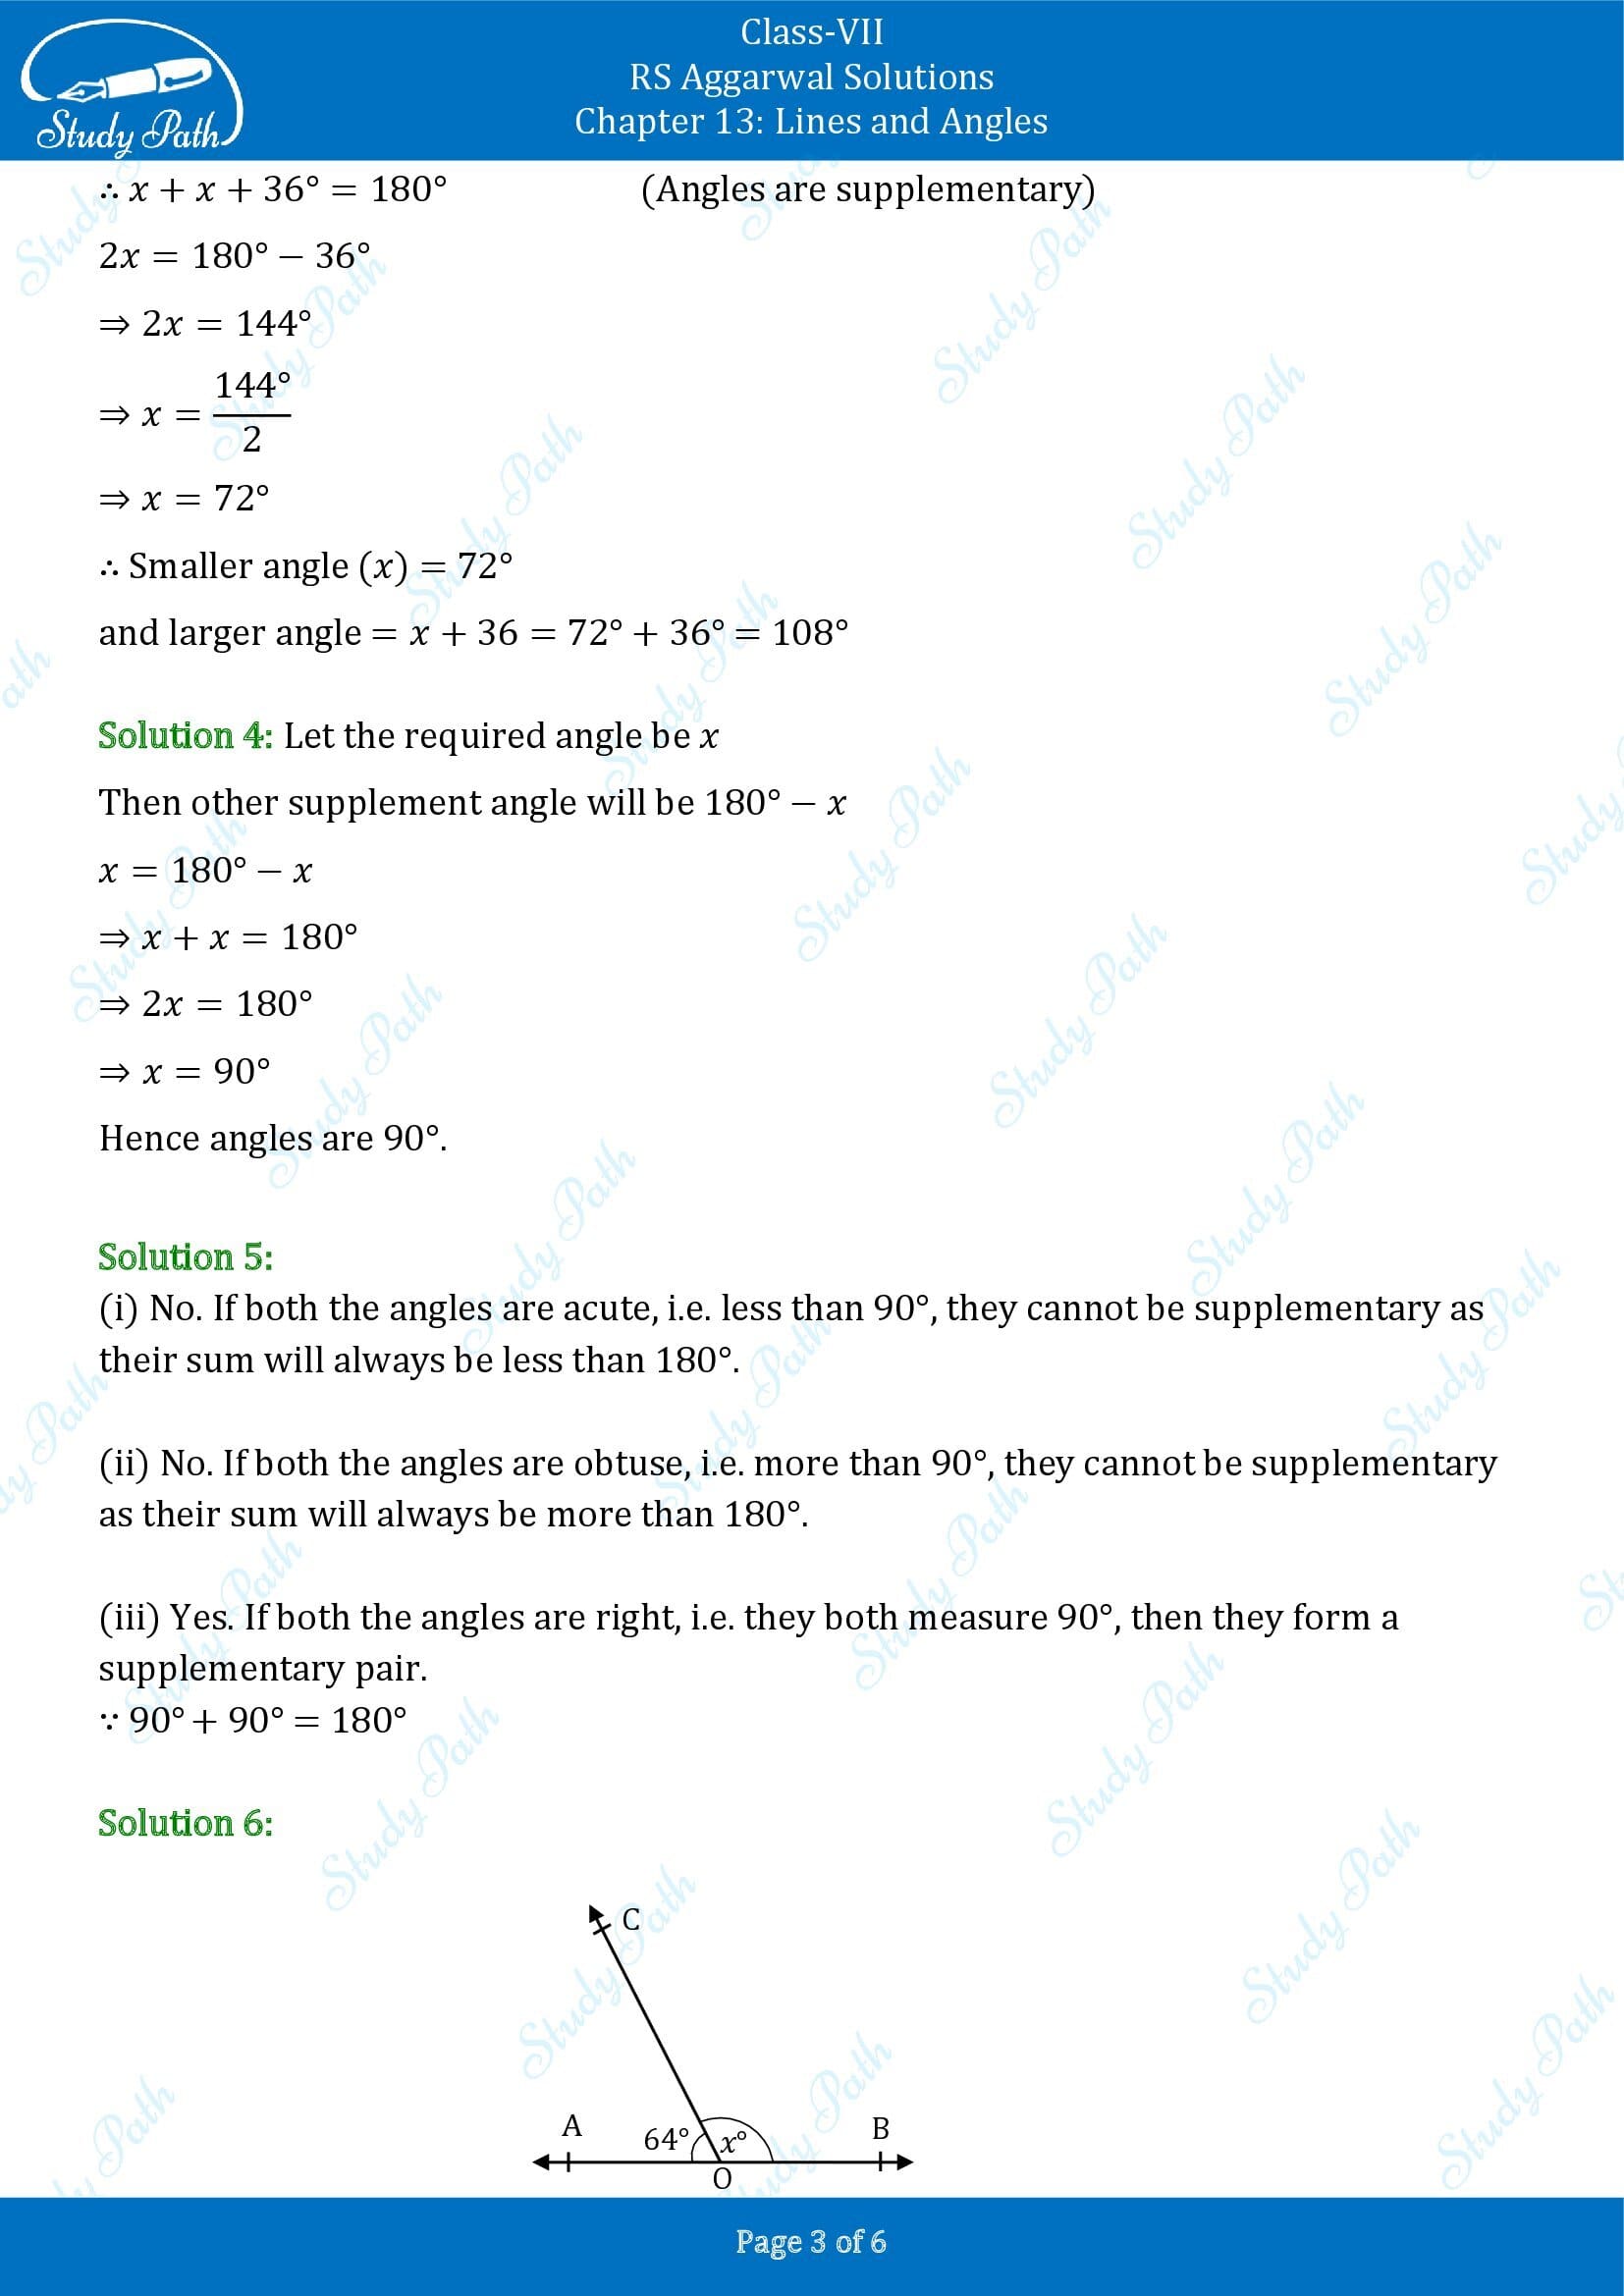 RS Aggarwal Solutions Class 7 Chapter 13 Lines and Angles 00003